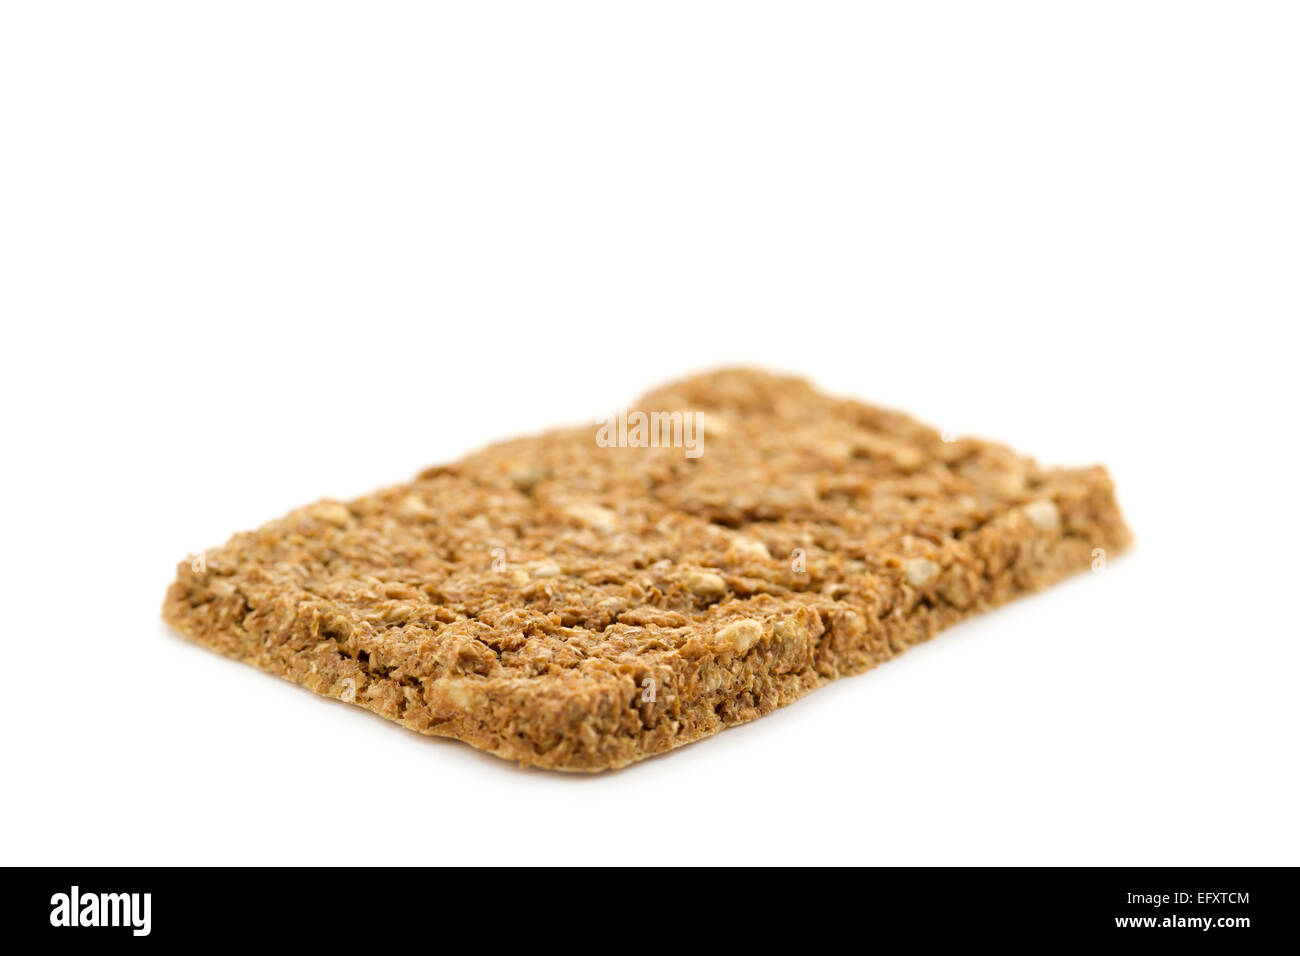 A crispbread with high content of dietary fiber on white background. Dietary fiber / roughage is not a digestible carbohydrate. Stock Photo